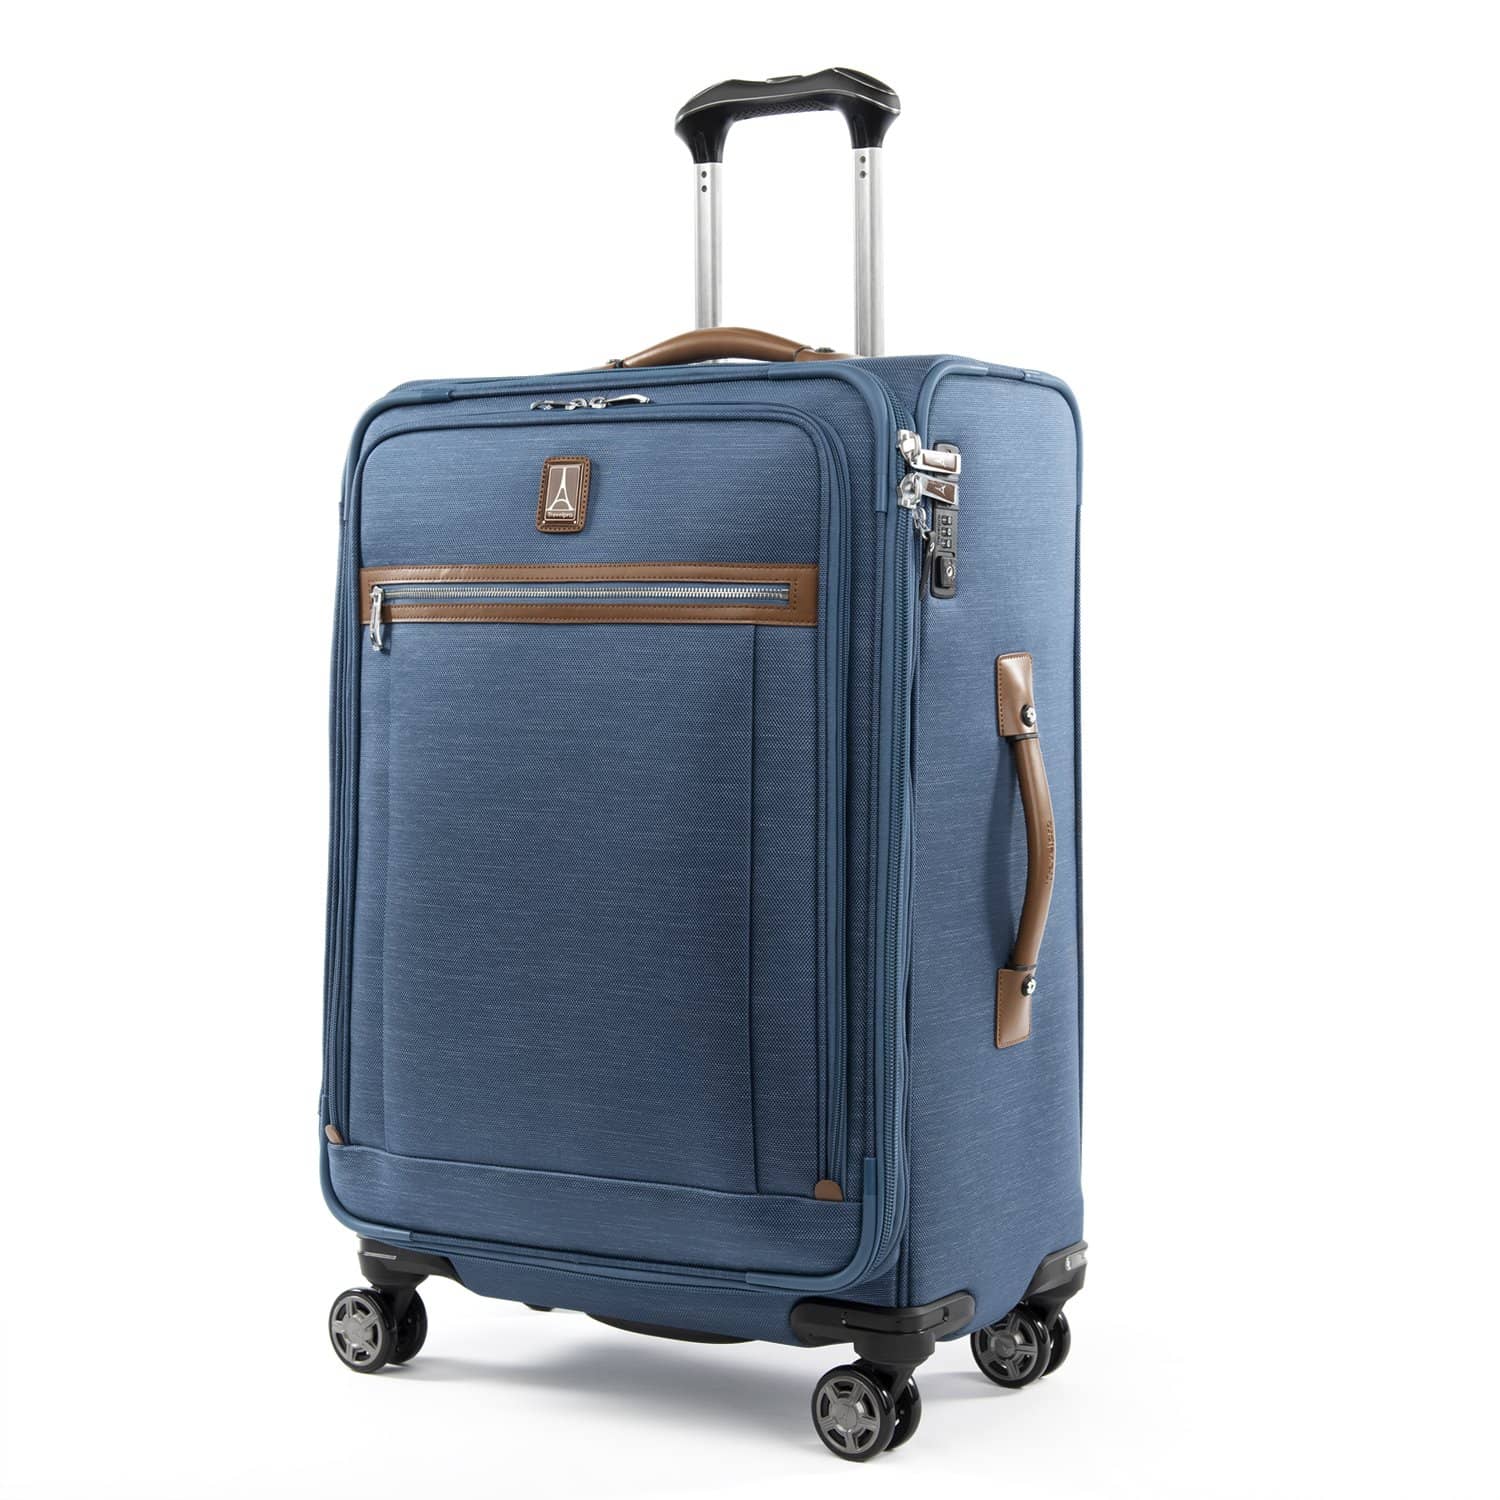 Travelpro Platinum Elite 25” Check-In Spinner 4-wheel rolling luggage blue